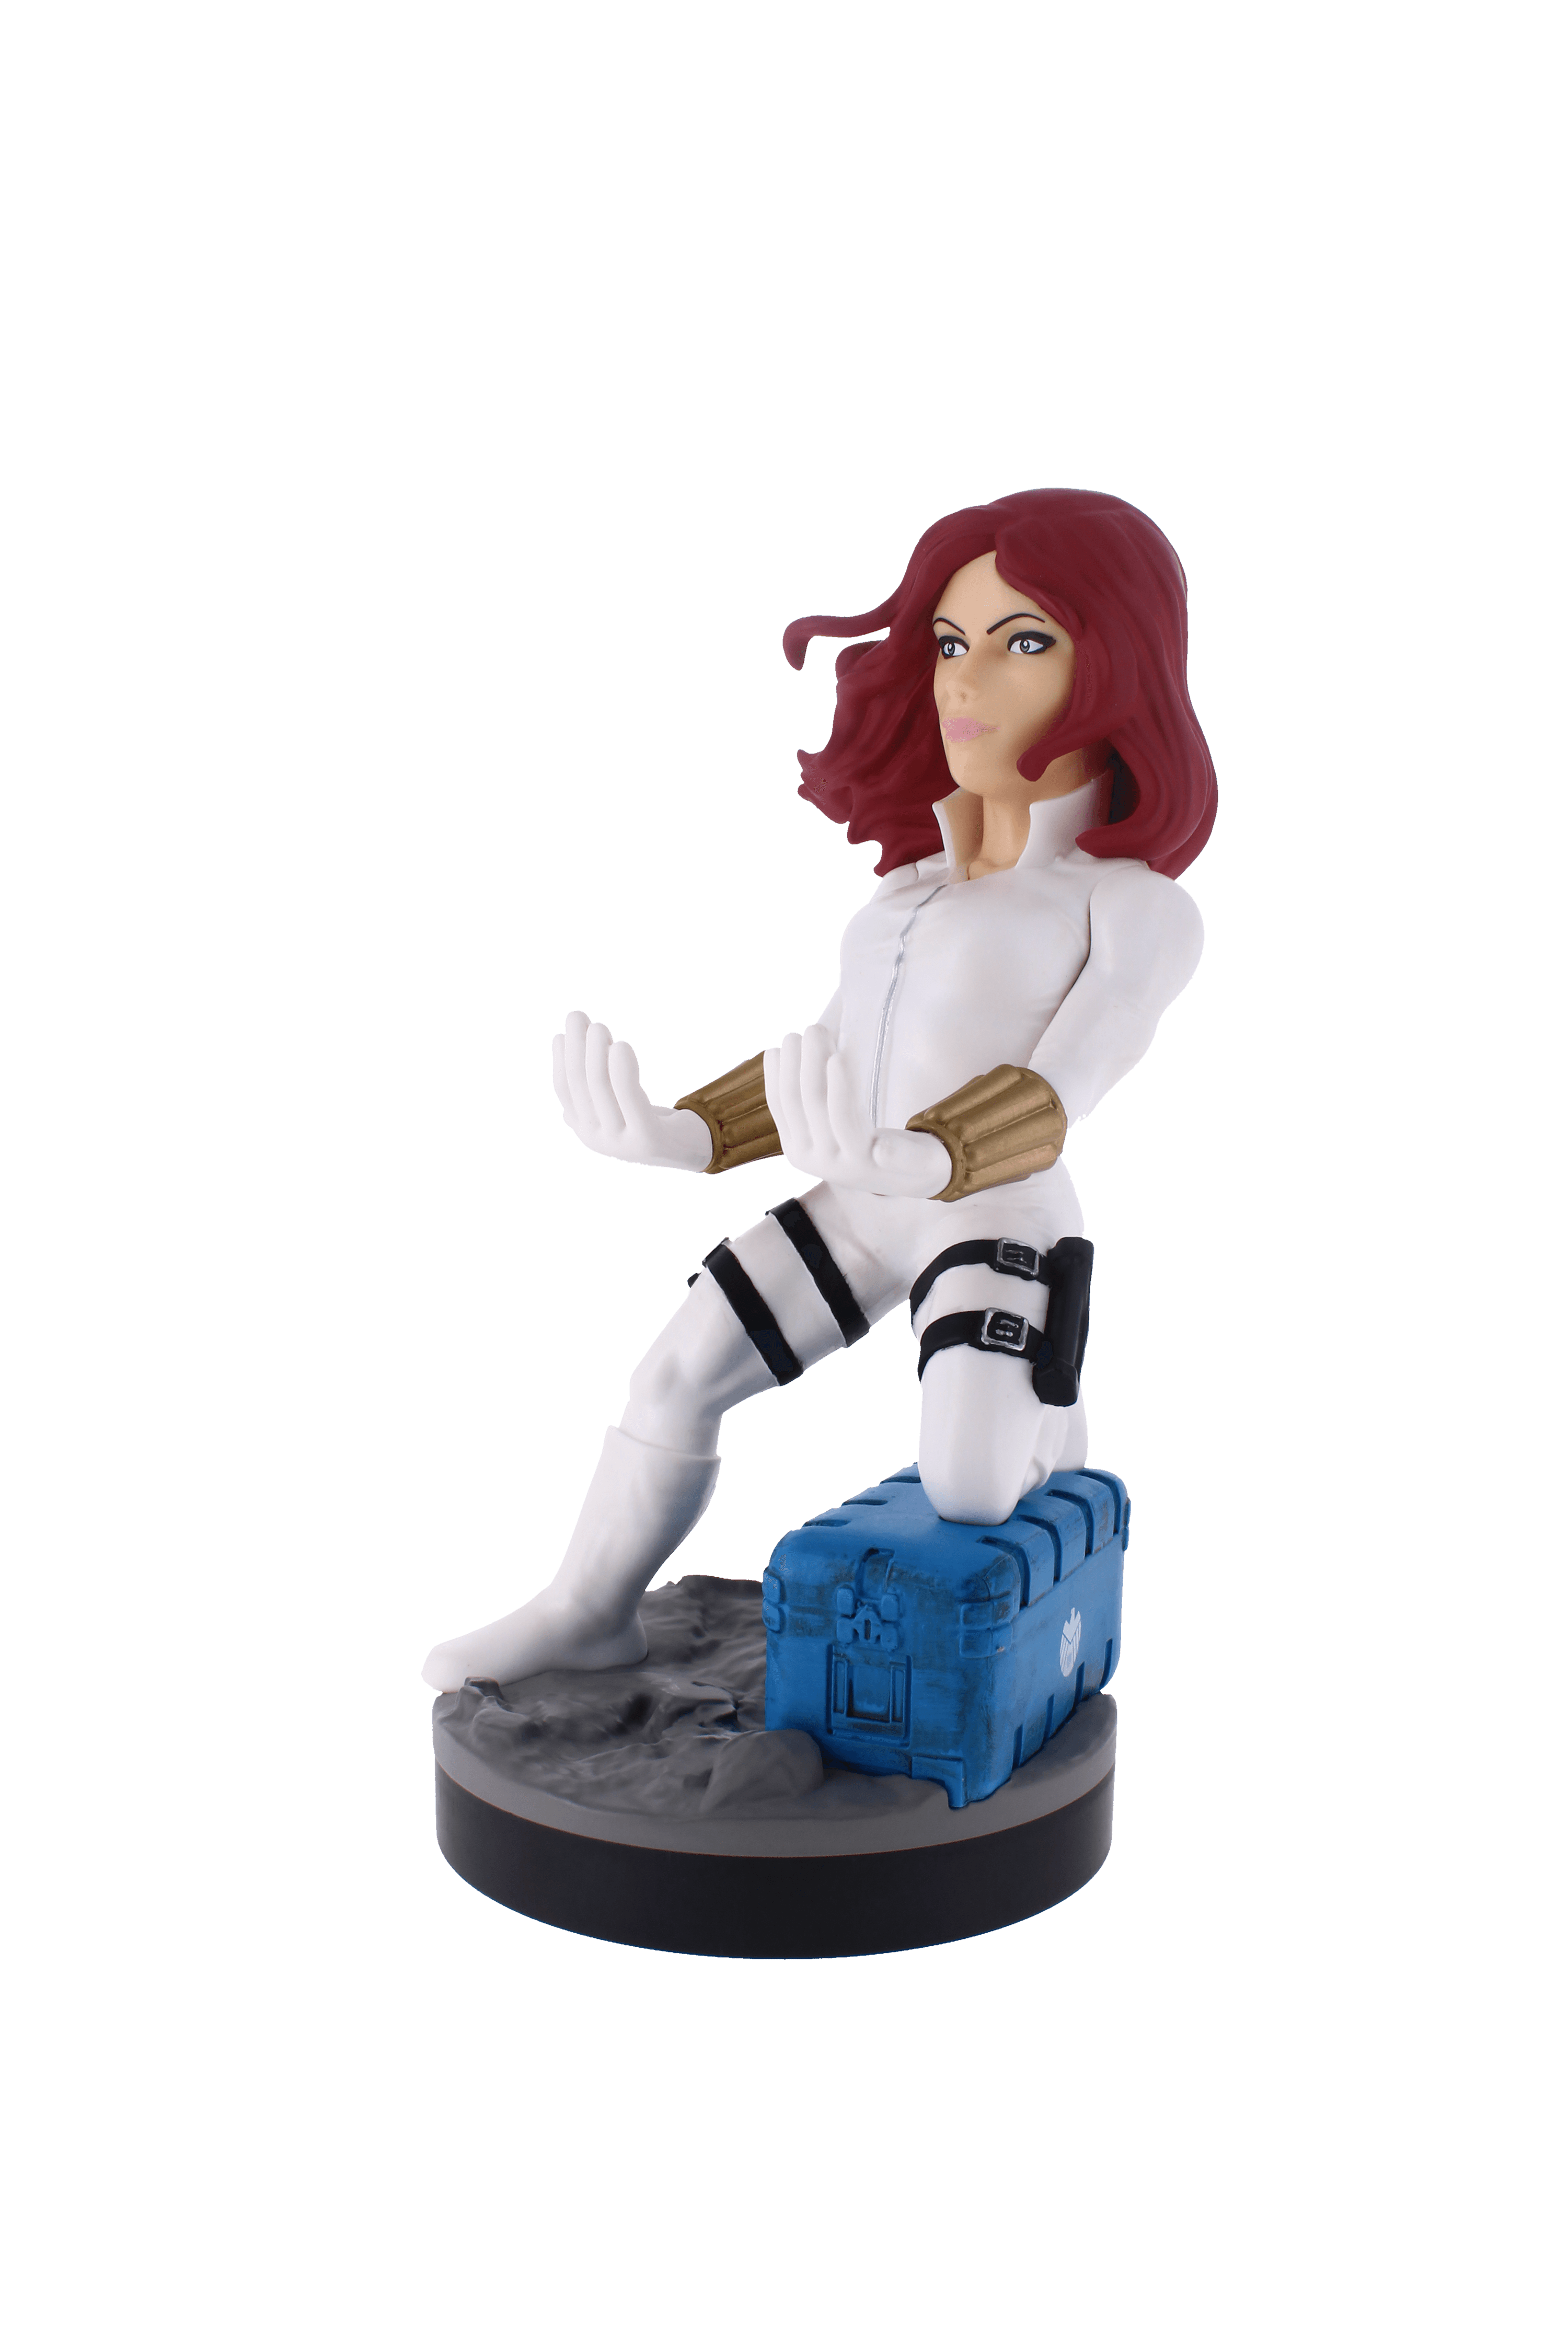 Cable Guys - Marvel - Black Widow (White Suit) - Phone & Controller Holder - The Card Vault